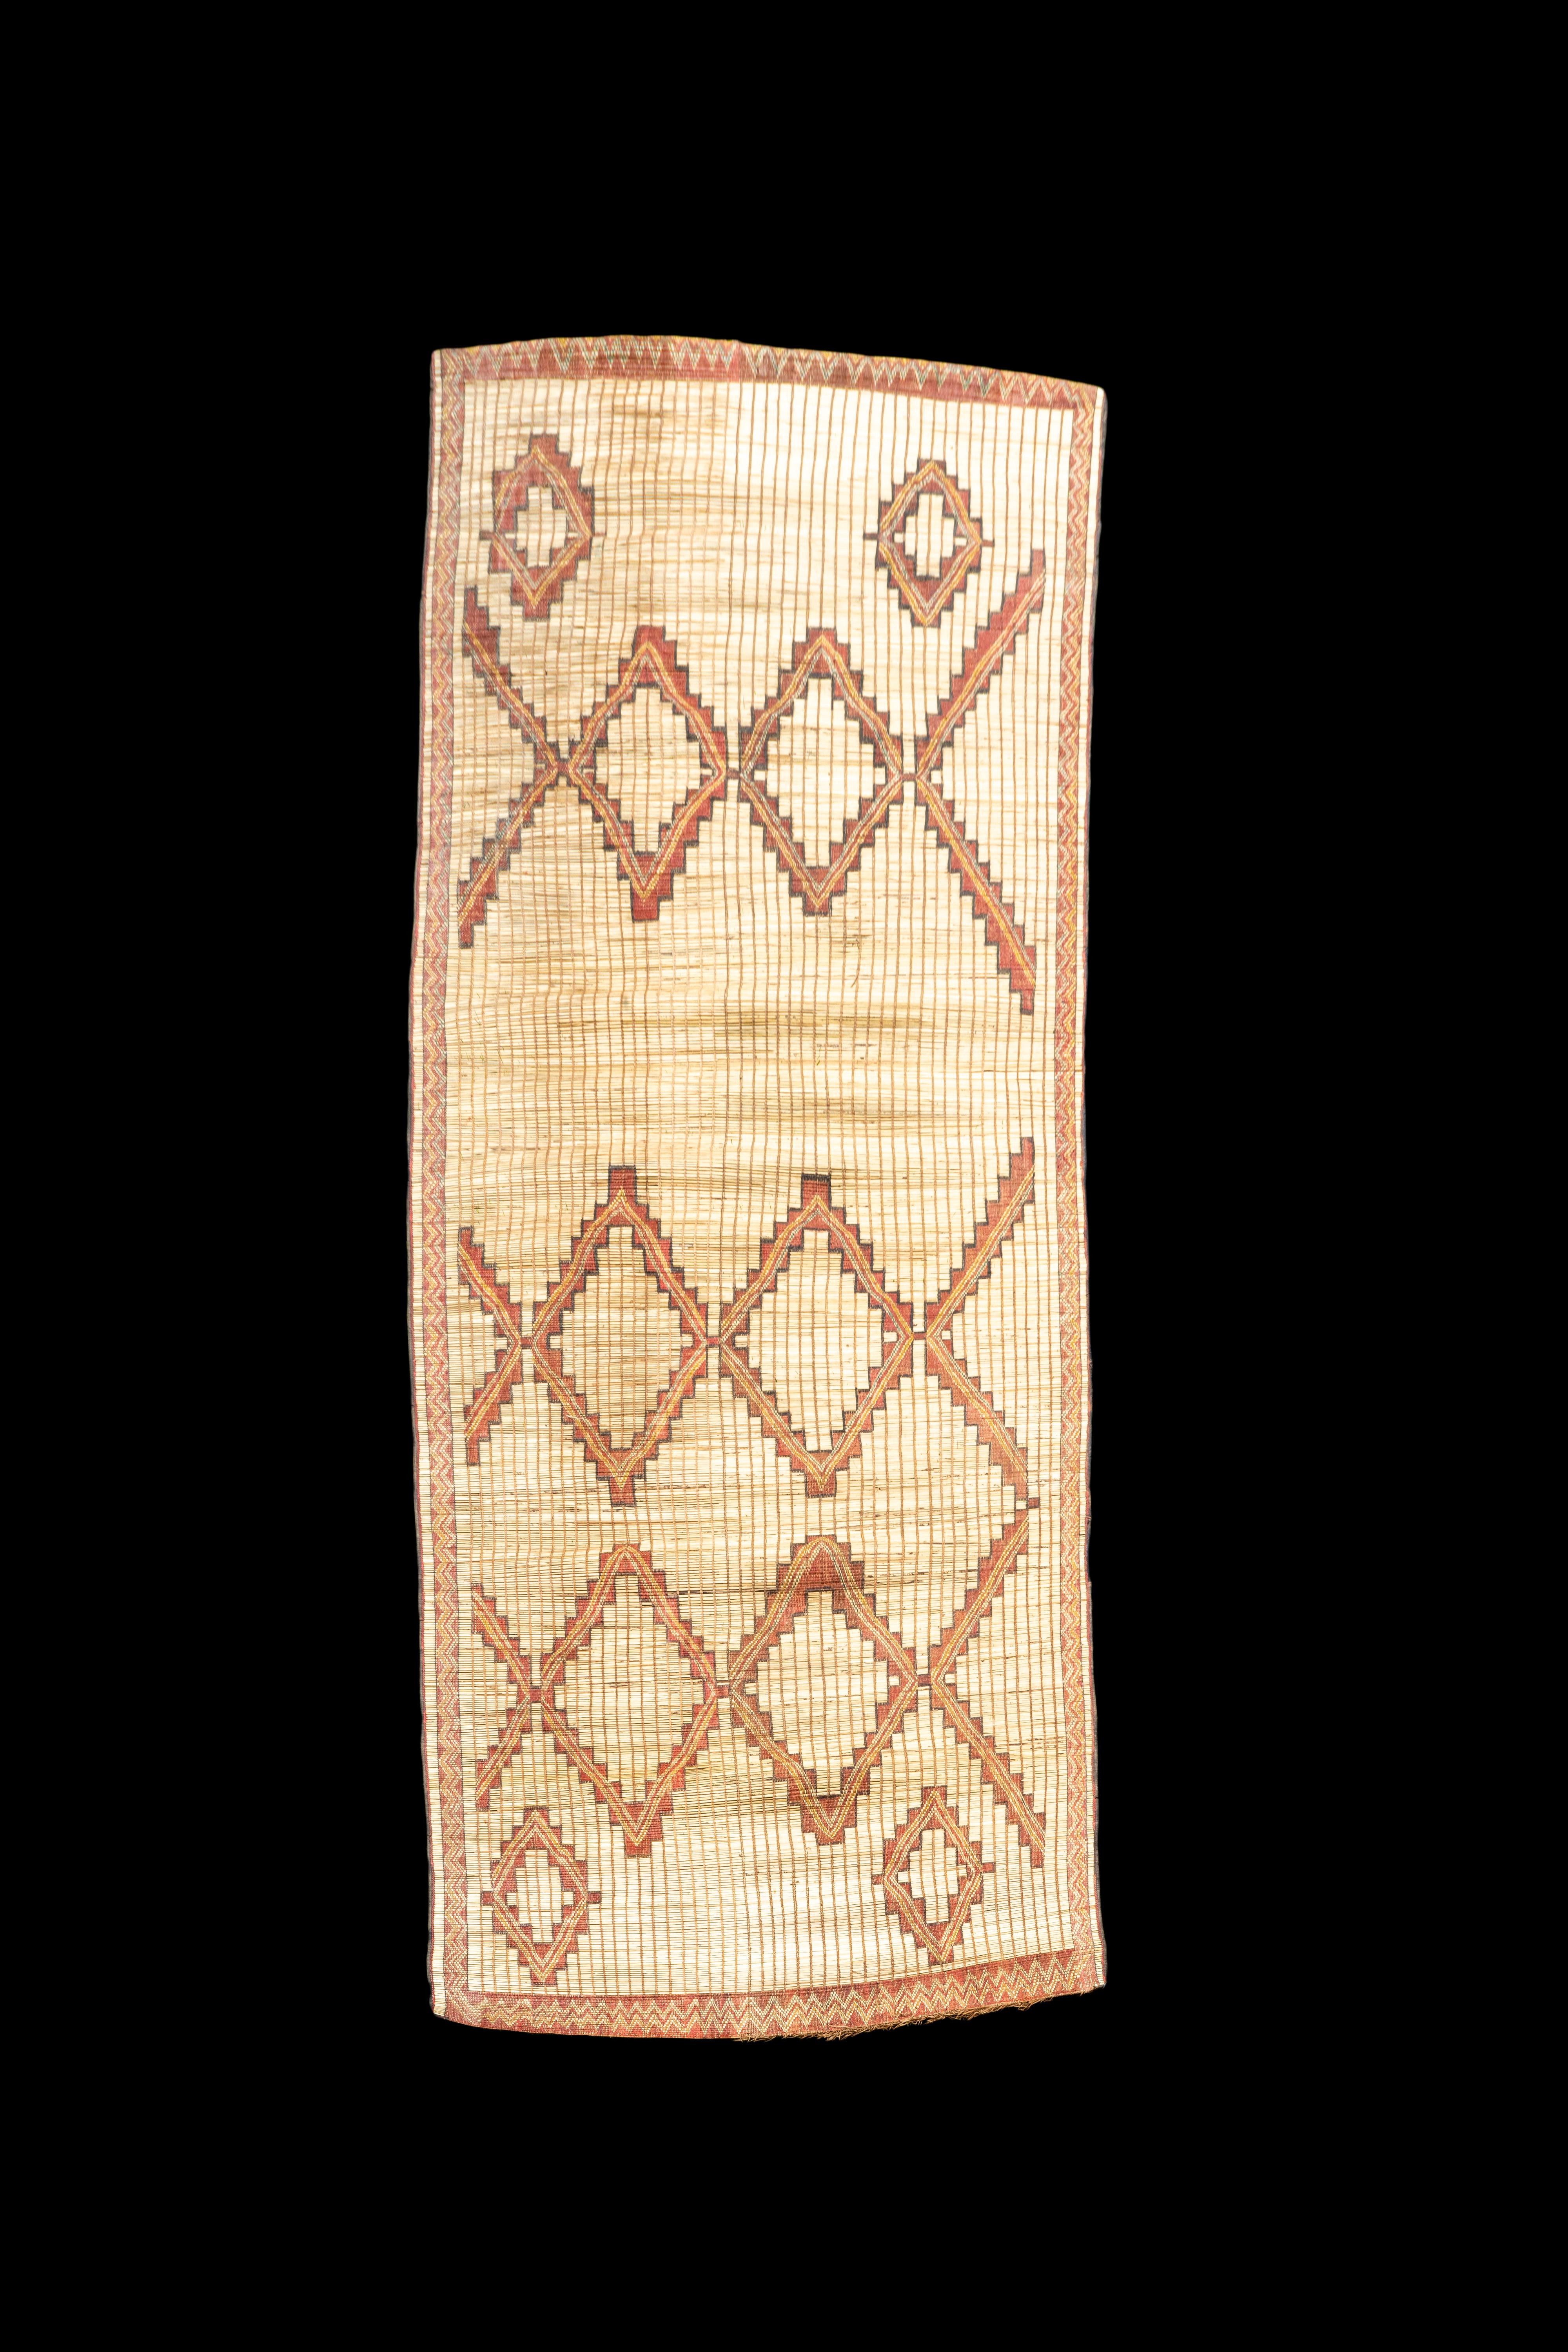 Mauritanian Mat or Rug, a true testament to the rich heritage and craftsmanship of northern African culture. Handcrafted by the skilled Tuareg tribes from Mauritania, this Moroccan Mauritanian (Tuareg) leather mat is a stunning fusion of tradition